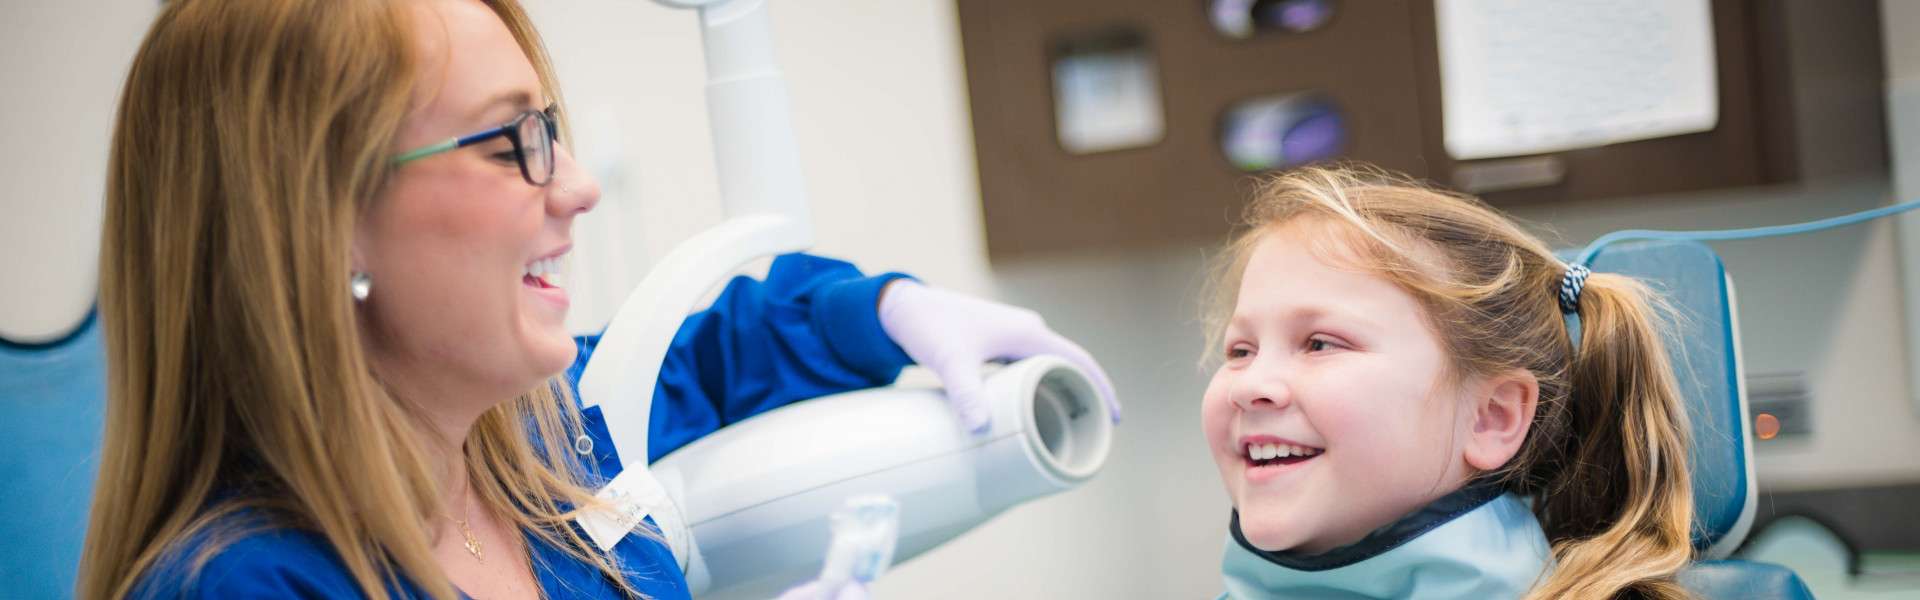 Dental Assistant taking X-rays of young patient